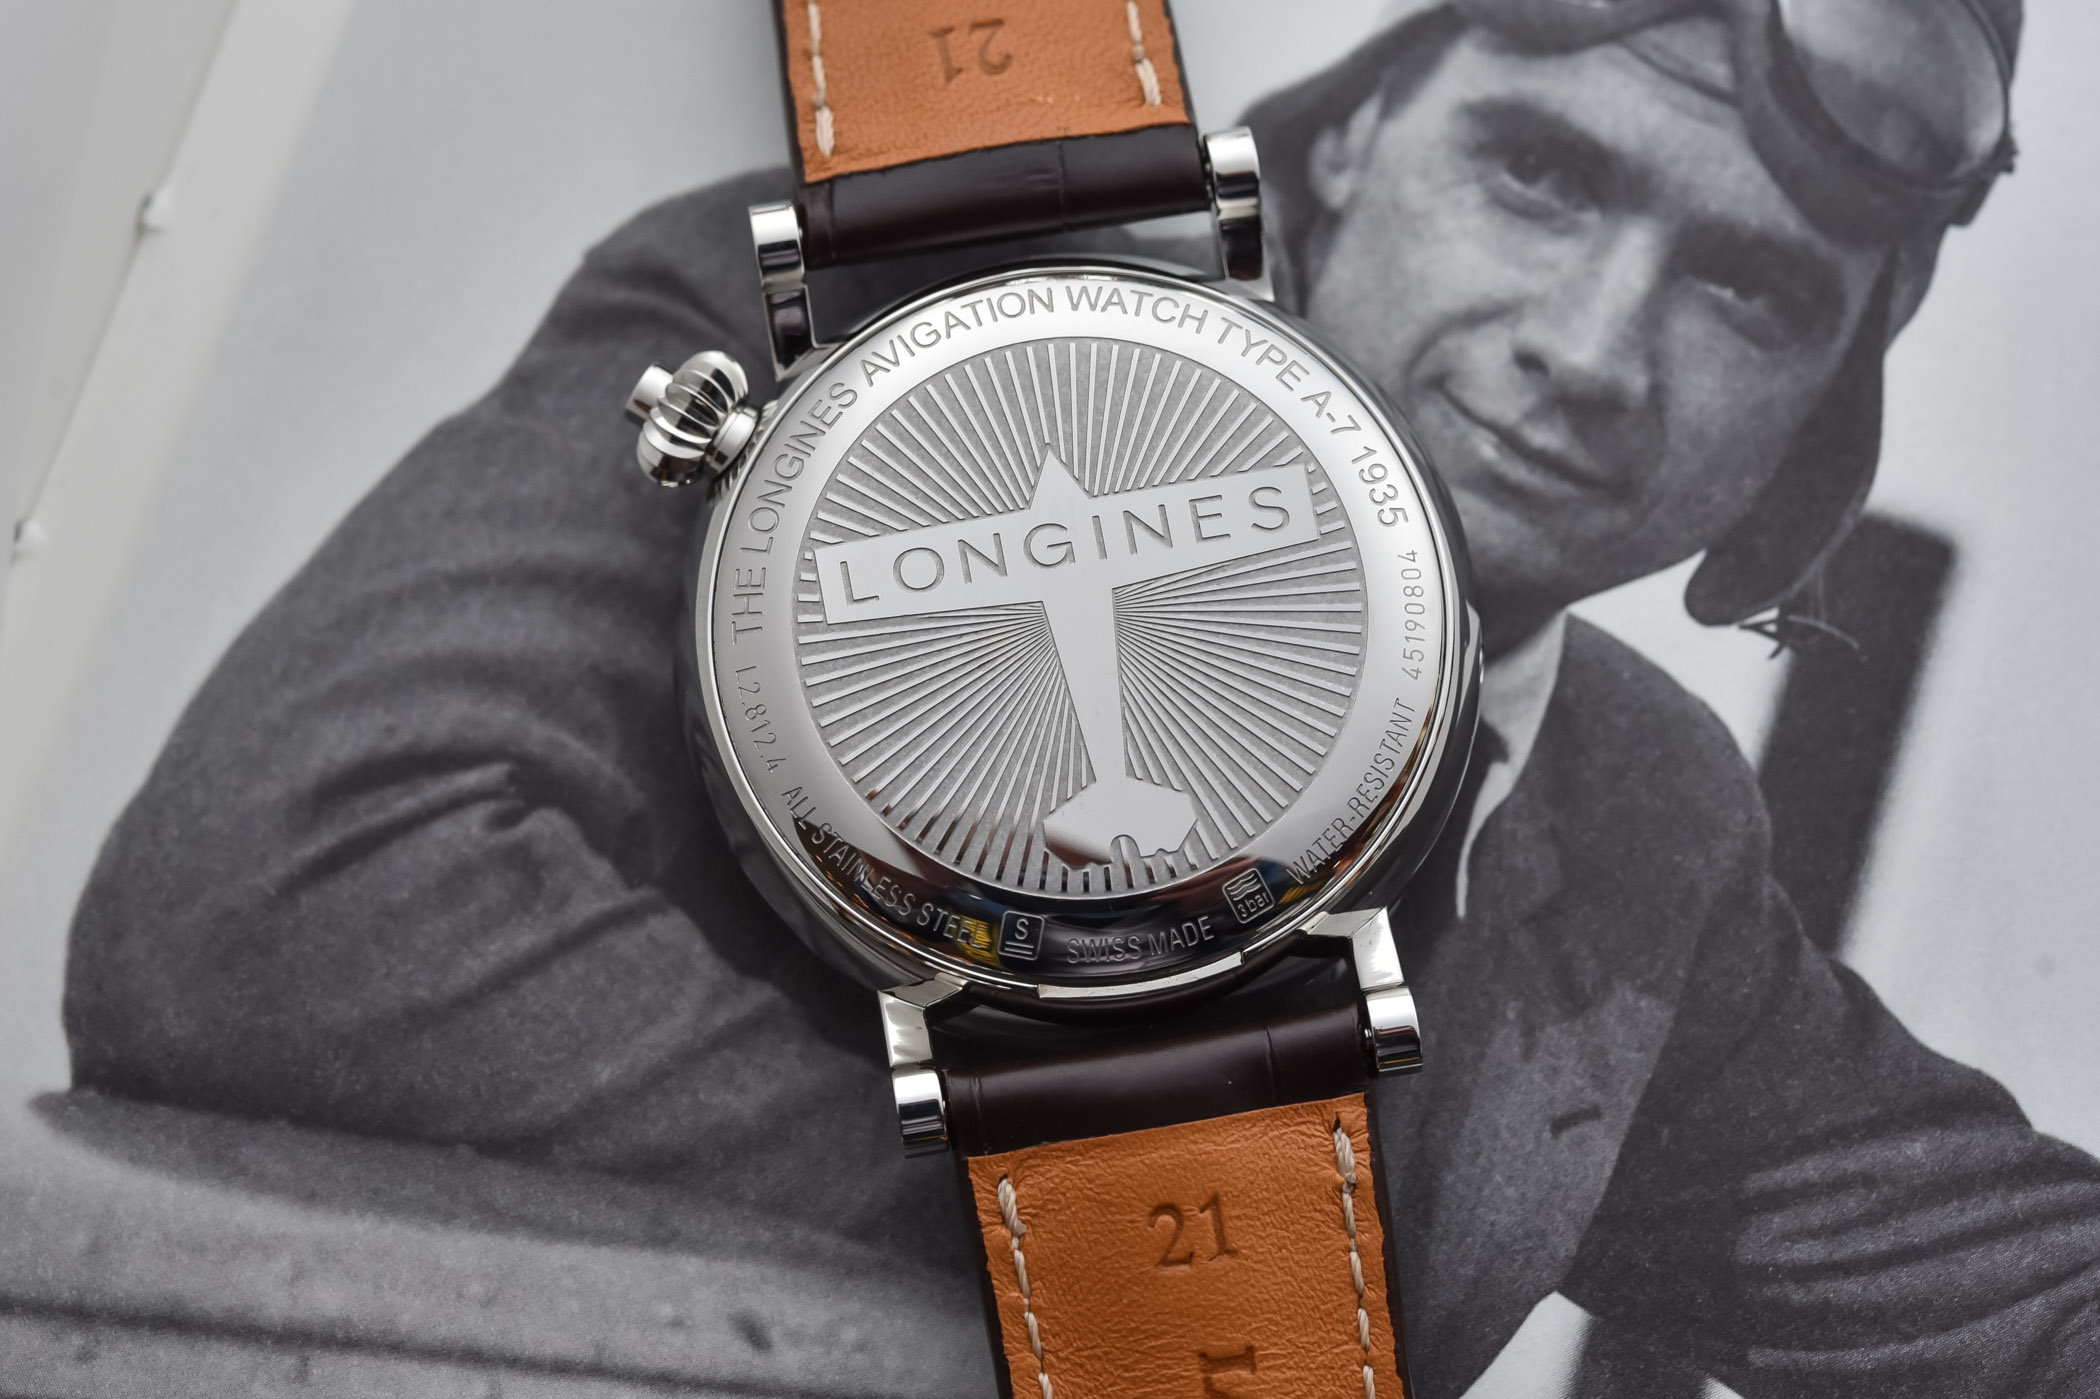 Longines Avigation Watch Type A-7 1935 - 2020 Edition Black Dial